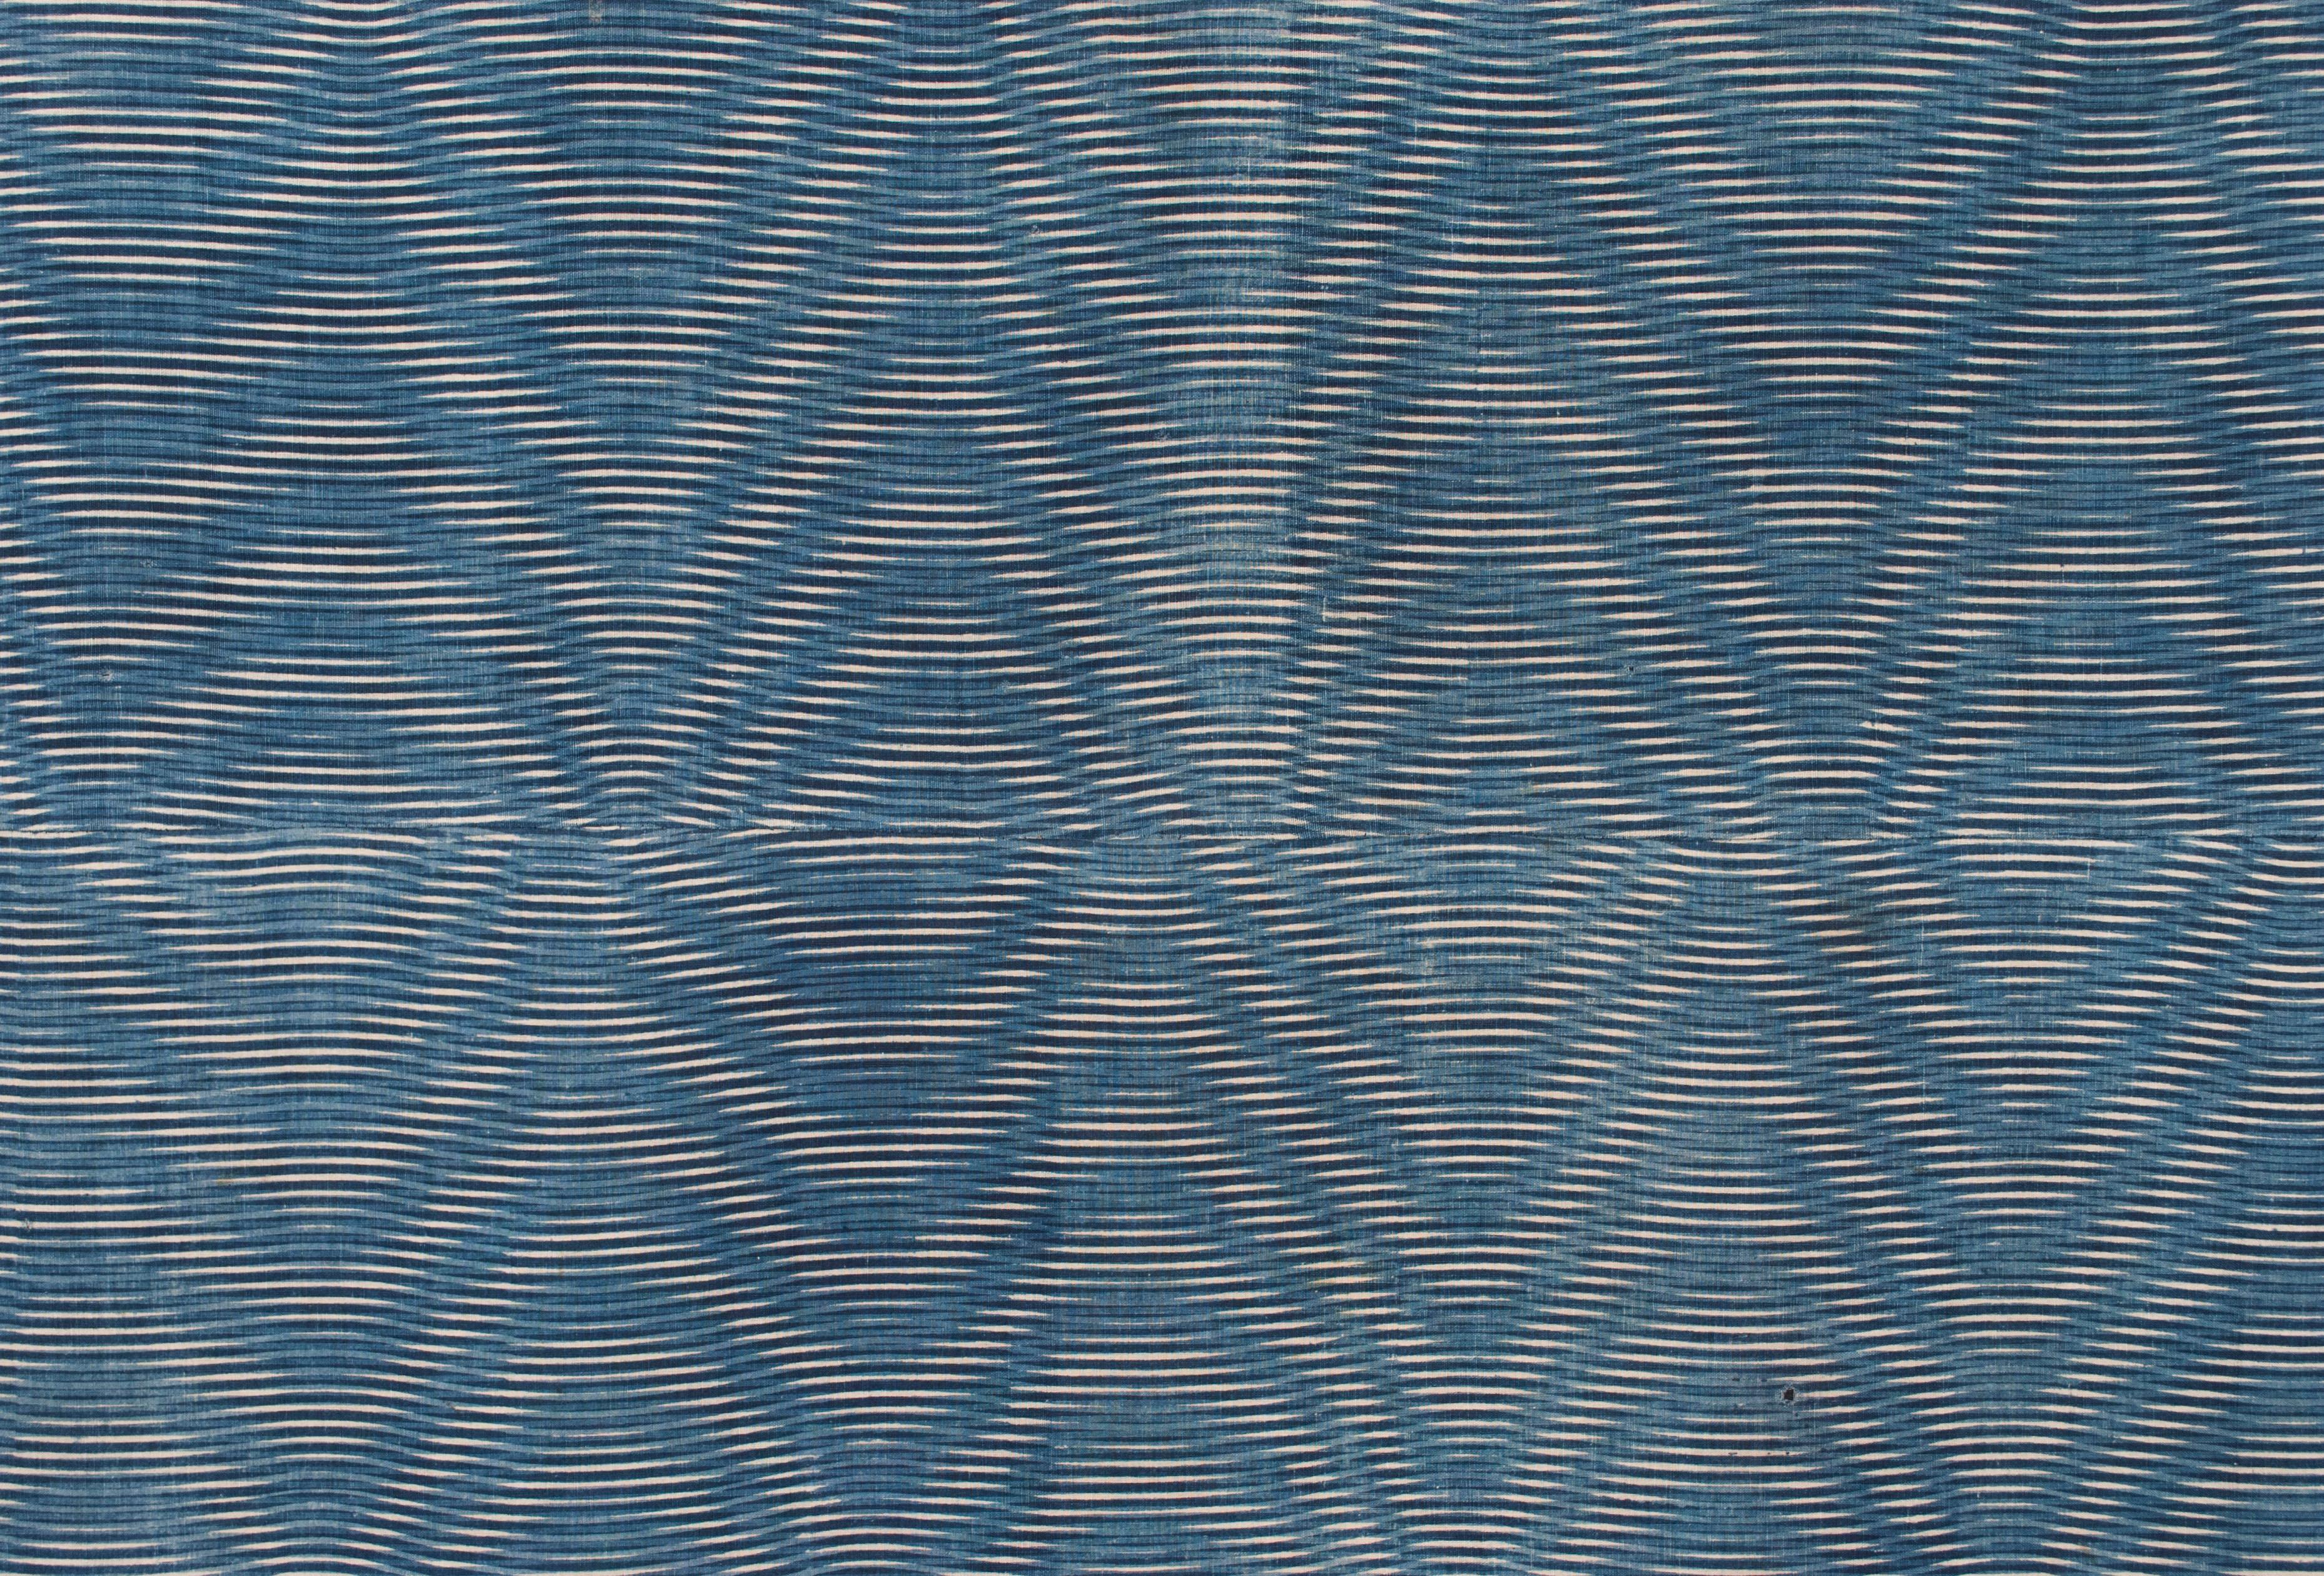 Late 19th Century Japanese Stencil-Dyed Textile / Kumano-zome

This 2-panel cotton textile was made in the Kumano region of Okayama Prefecture in the south of Honshu Island, Japan. It’s unique moire-like pattern is known as ‘Kumano-zome’ (dyed in